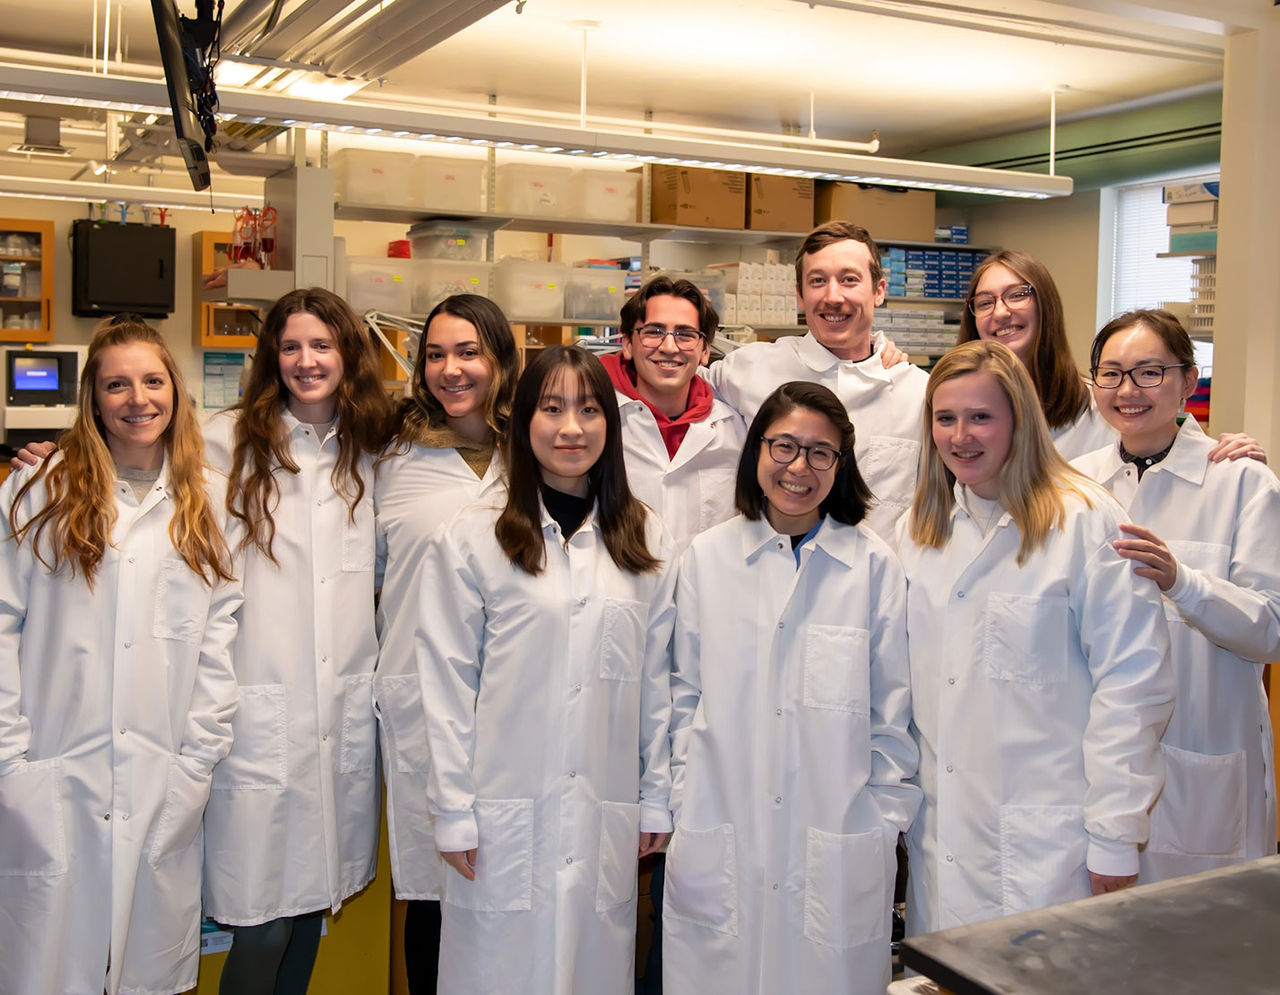 MLS students in lab coats posing in their laboratory.